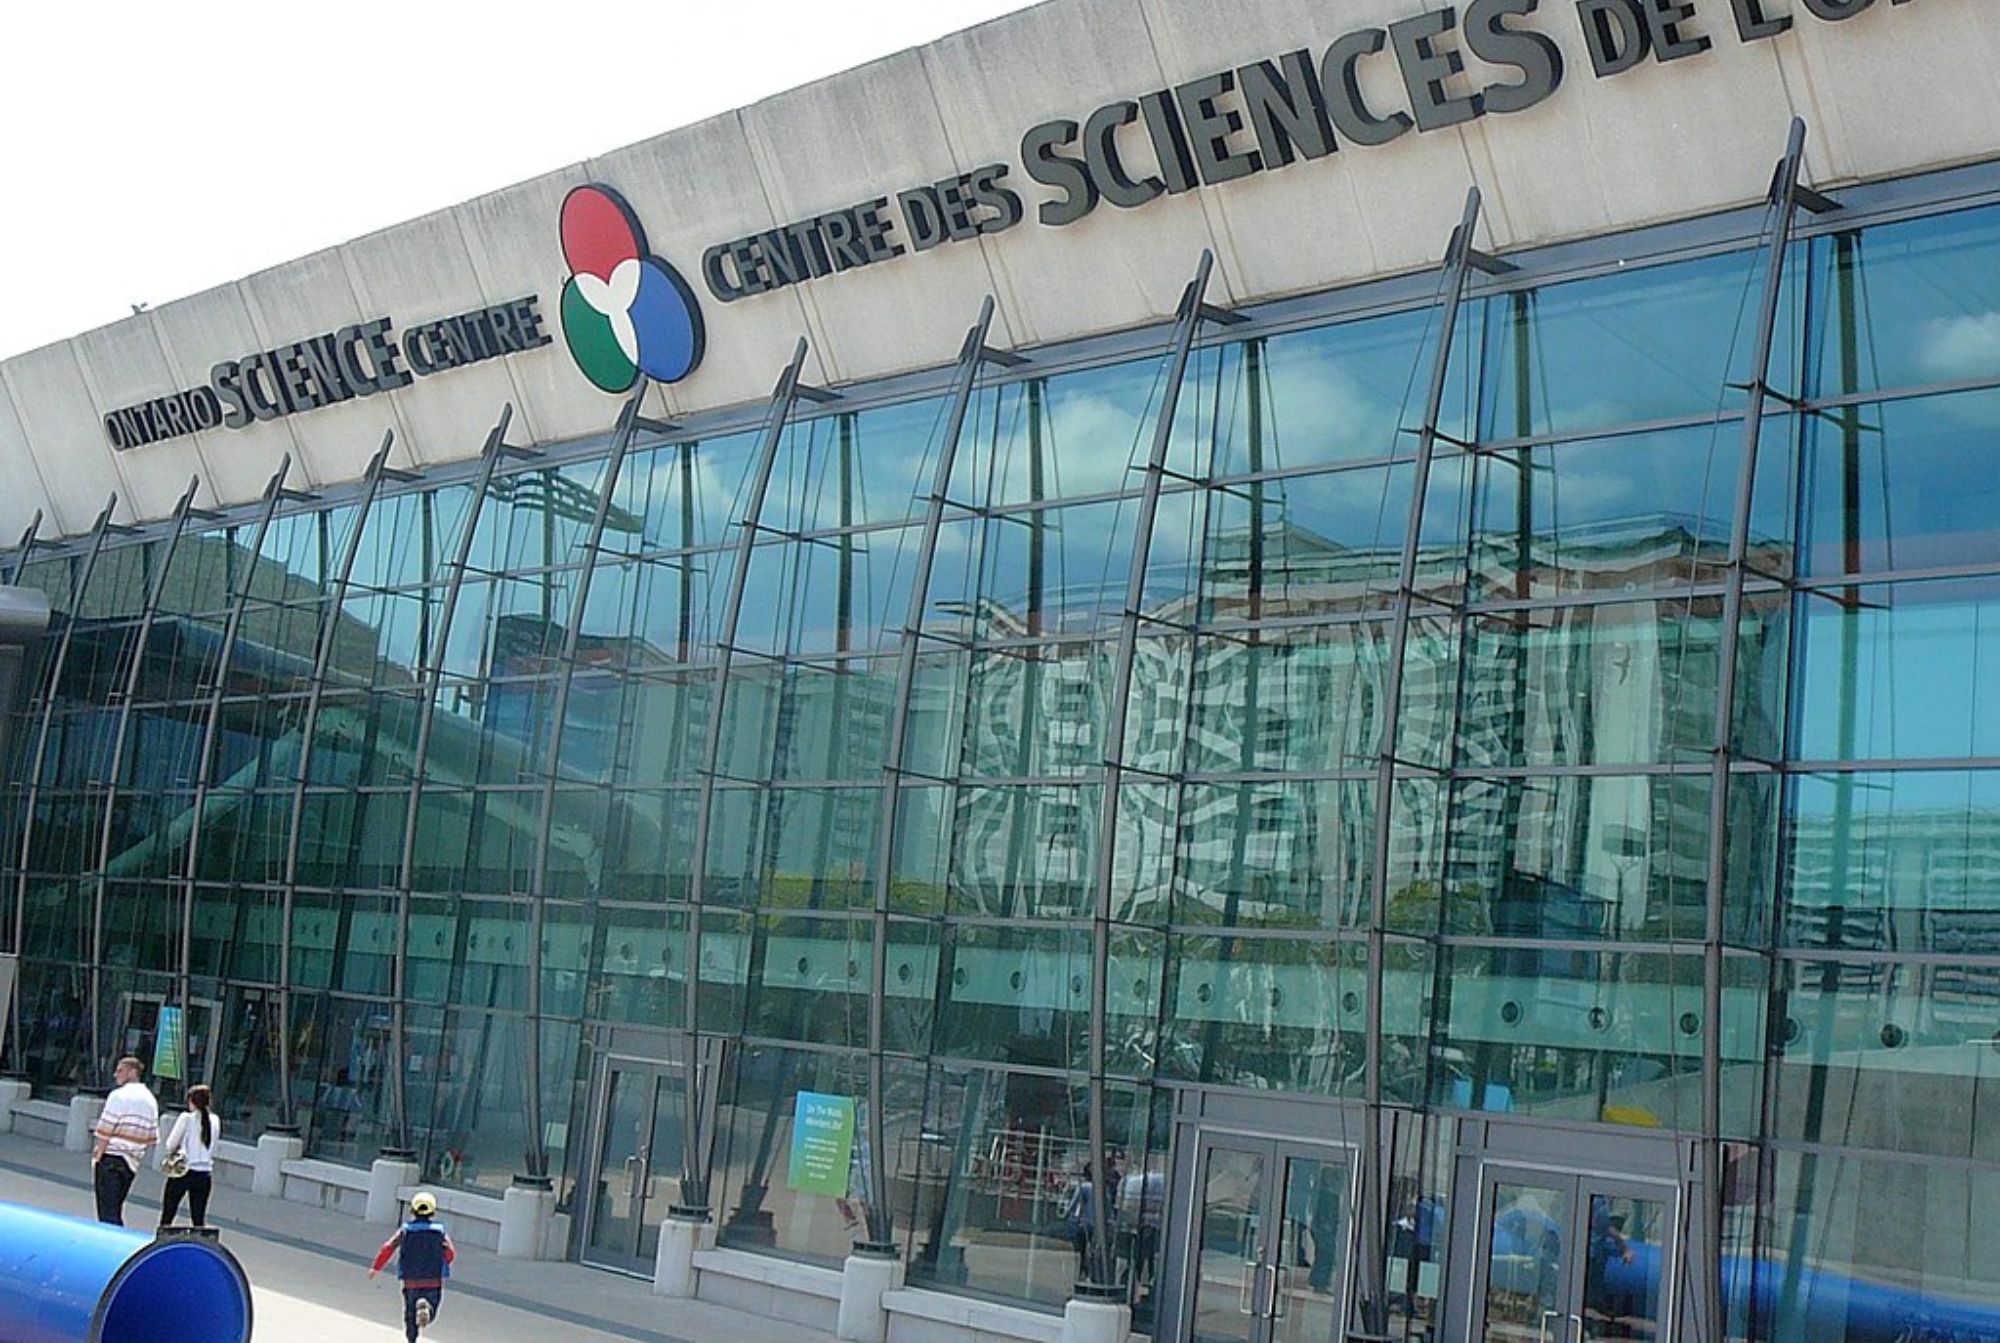 Front view of the Ontario Science Centre. Photo by Steve Harris. Source: Wikimedia Commons.